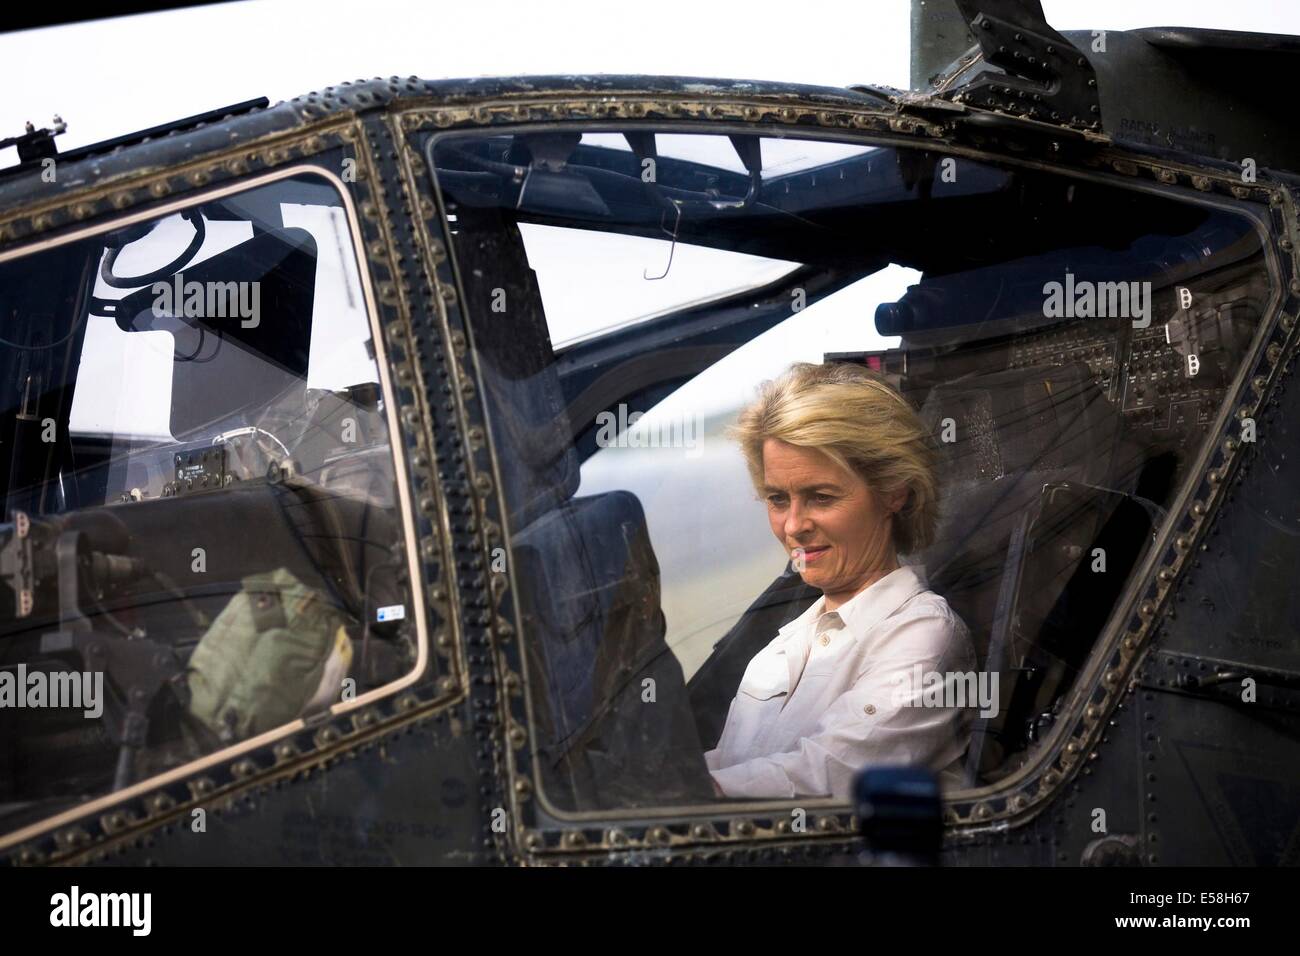 Mazar-i-Sharif, Afghanistan. 23rd July, 2014. German Defence Minister Ursula von der Leyen sits in an AH-64D Apache helicopter during a demonstration of the air force equipment of various ISAF forces at Camp Marmal outside Mazar-i-Sharif July 23, 2014.  © Thomas Peter/dpa picture alliance/Alamy Live News Stock Photo